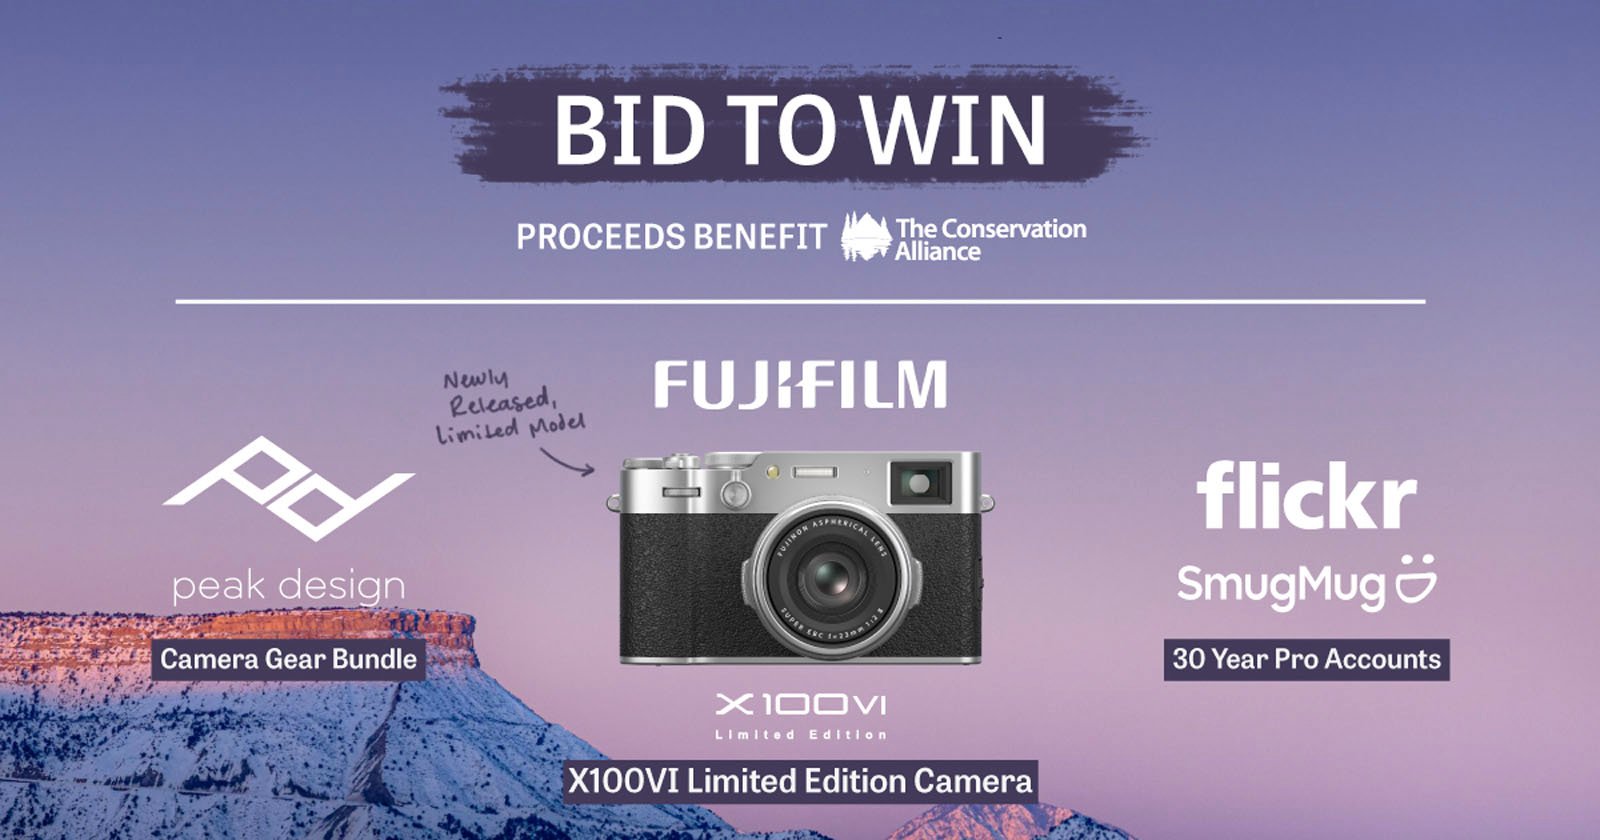 Limited Edition Fujifilm X100VI to be Auctioned to Raise Funds to Protect the Environment